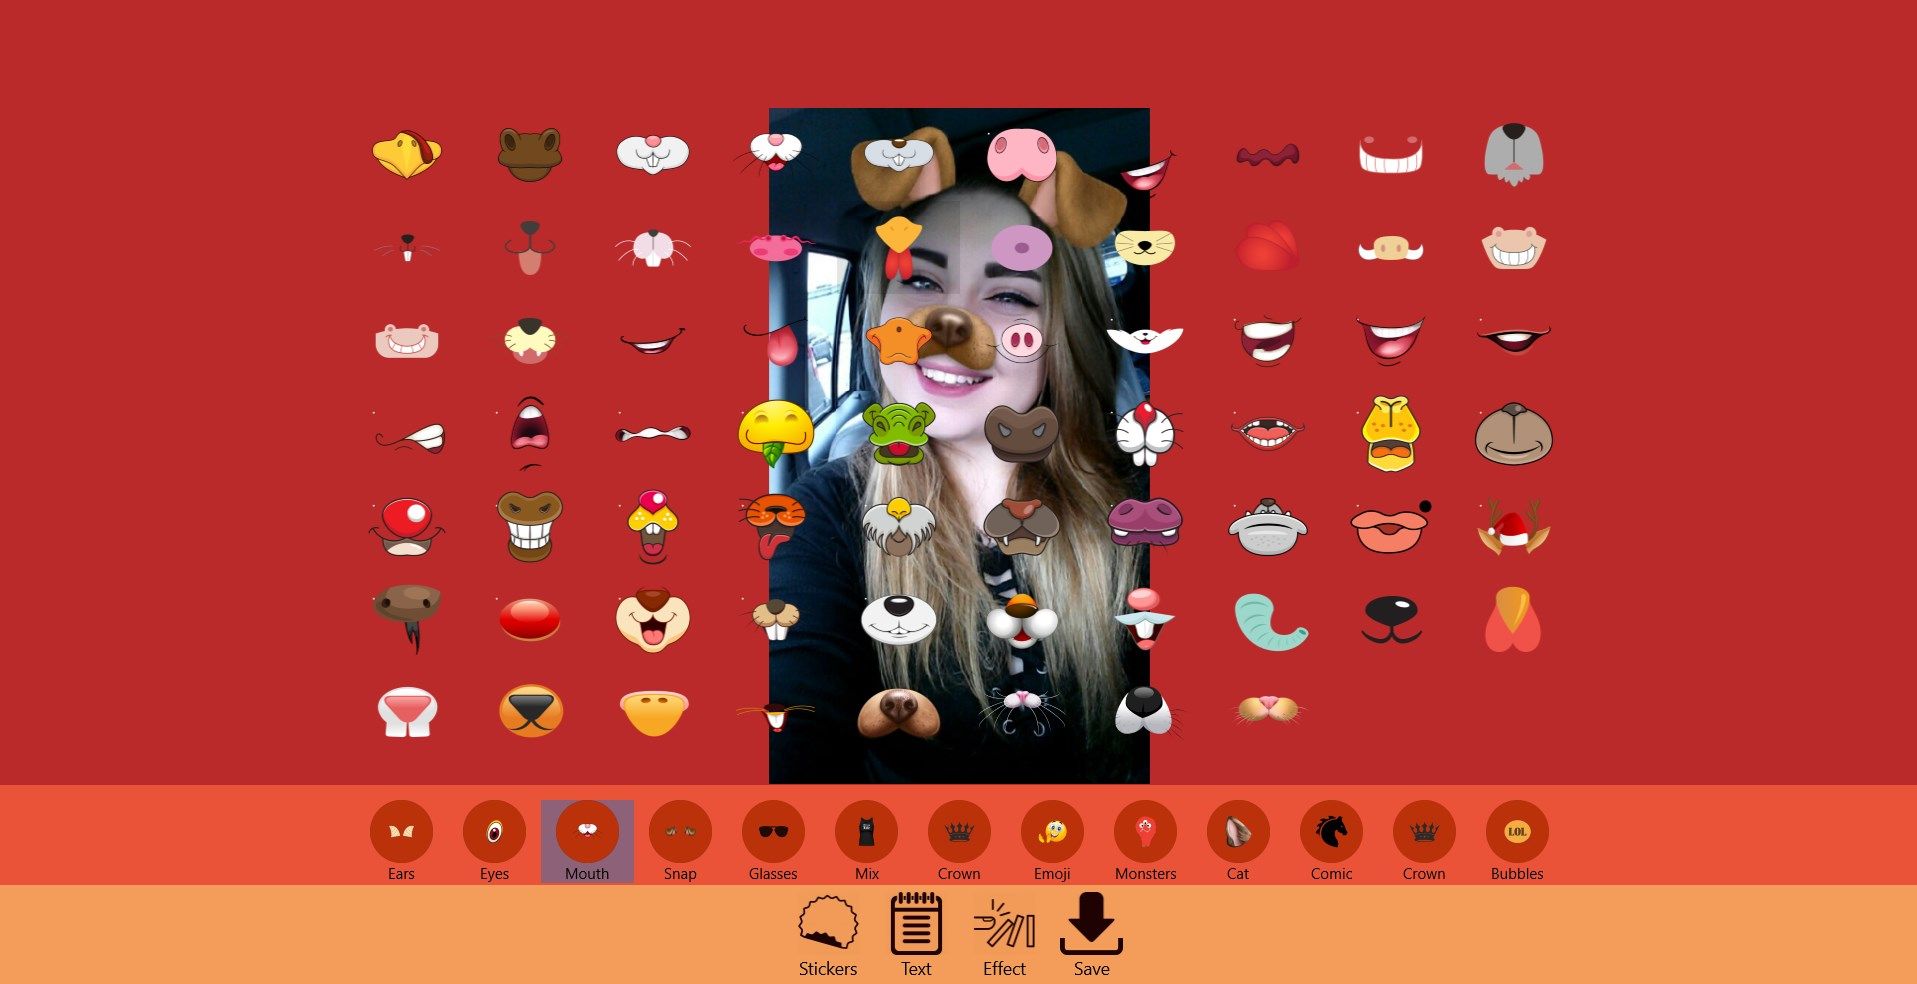 Snap Photo-Filters & Stickers